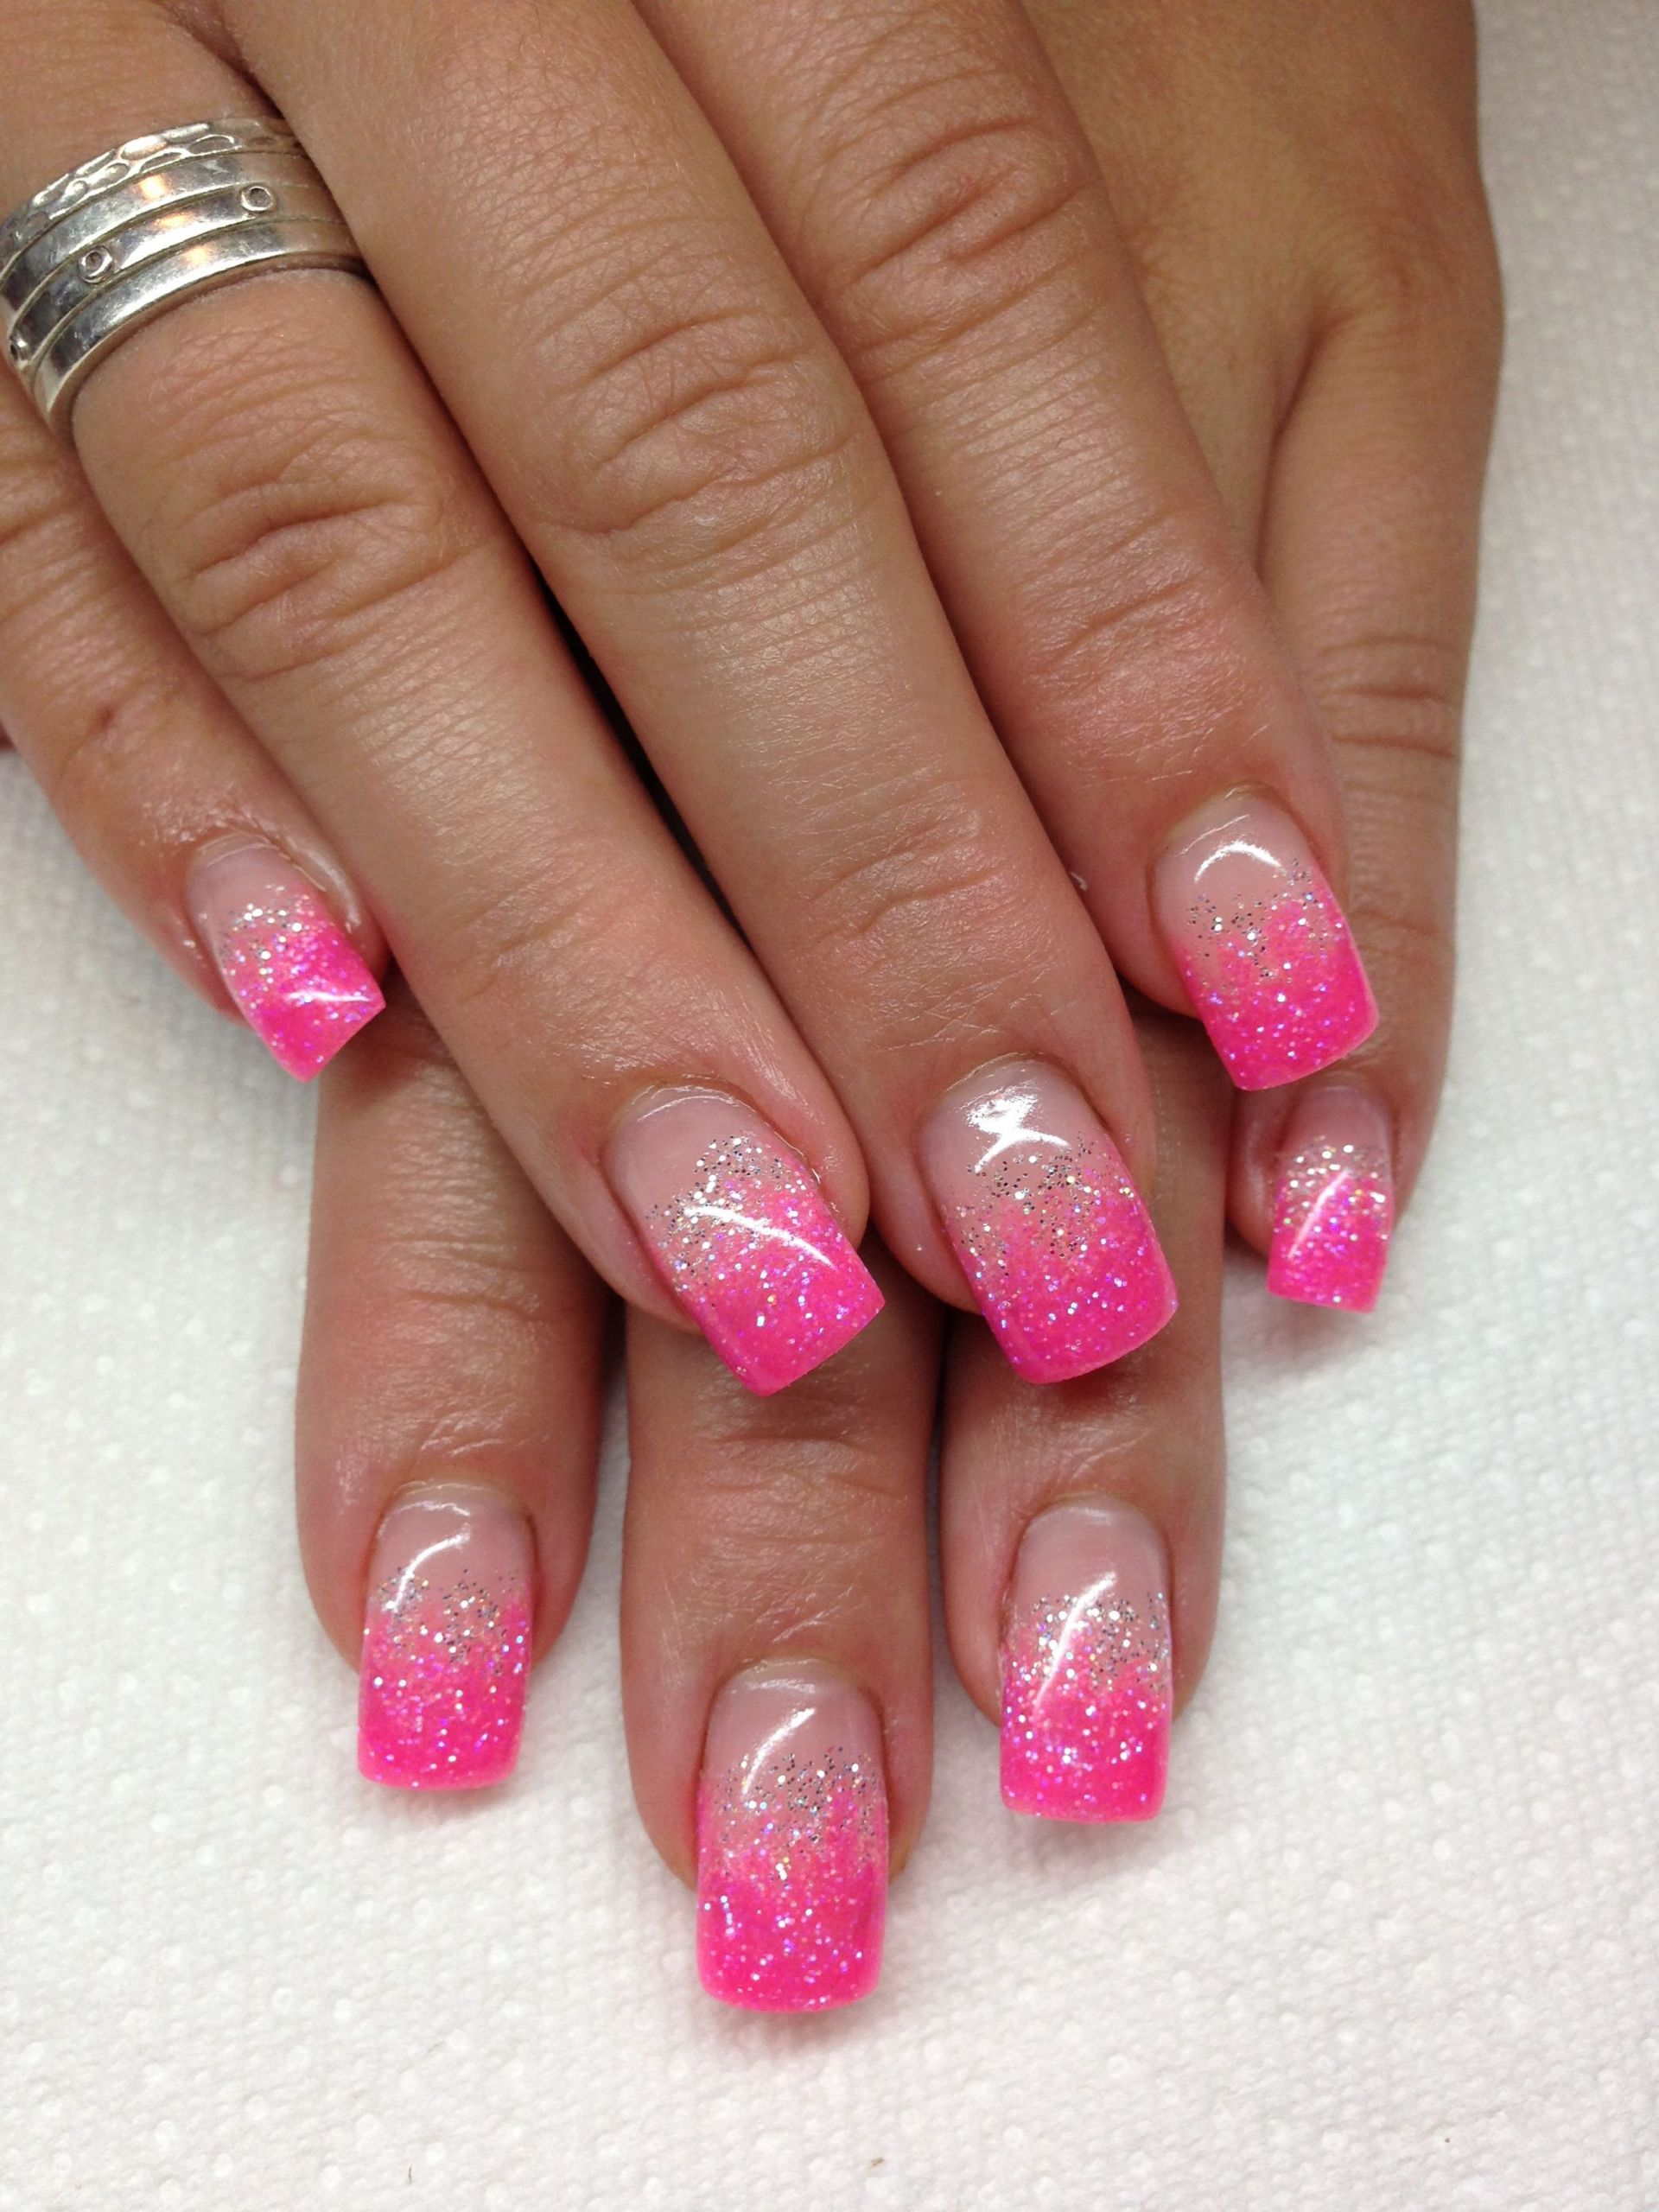 Pink Nails With Glitter Tips
 I love the pink and glitter tips Nails